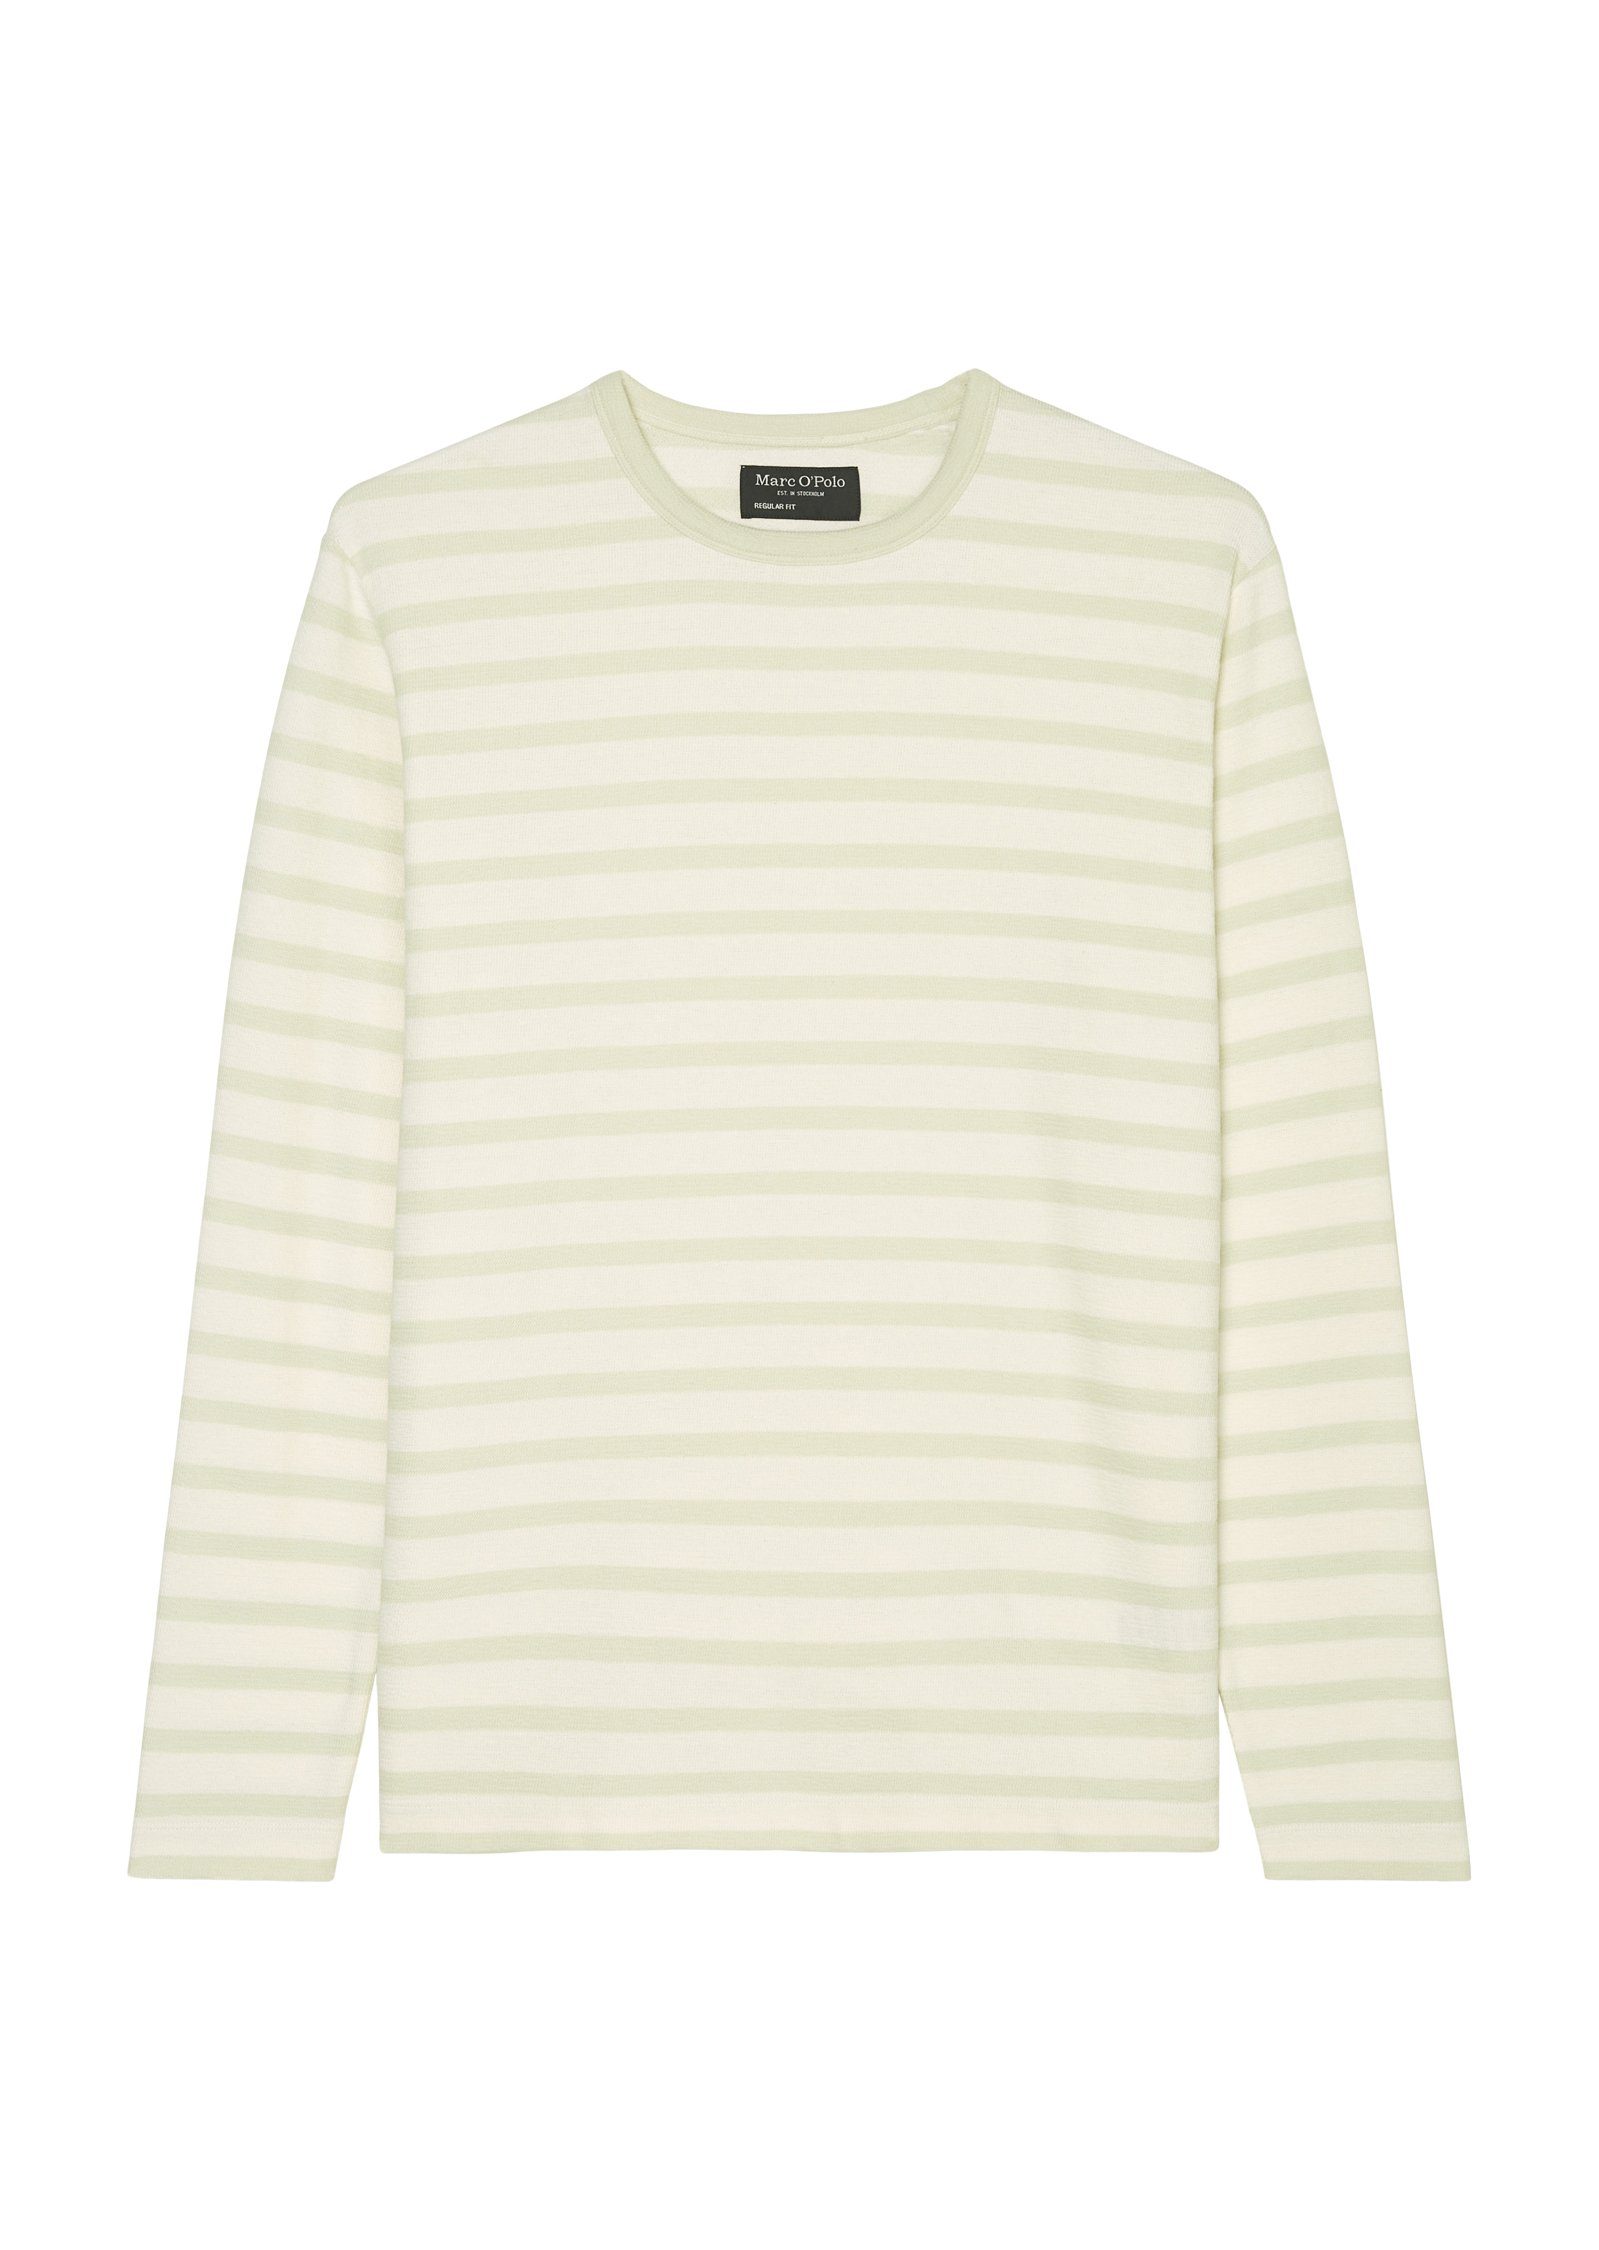 Marc O'Polo T-Shirt Longsleeve, structured jersey with